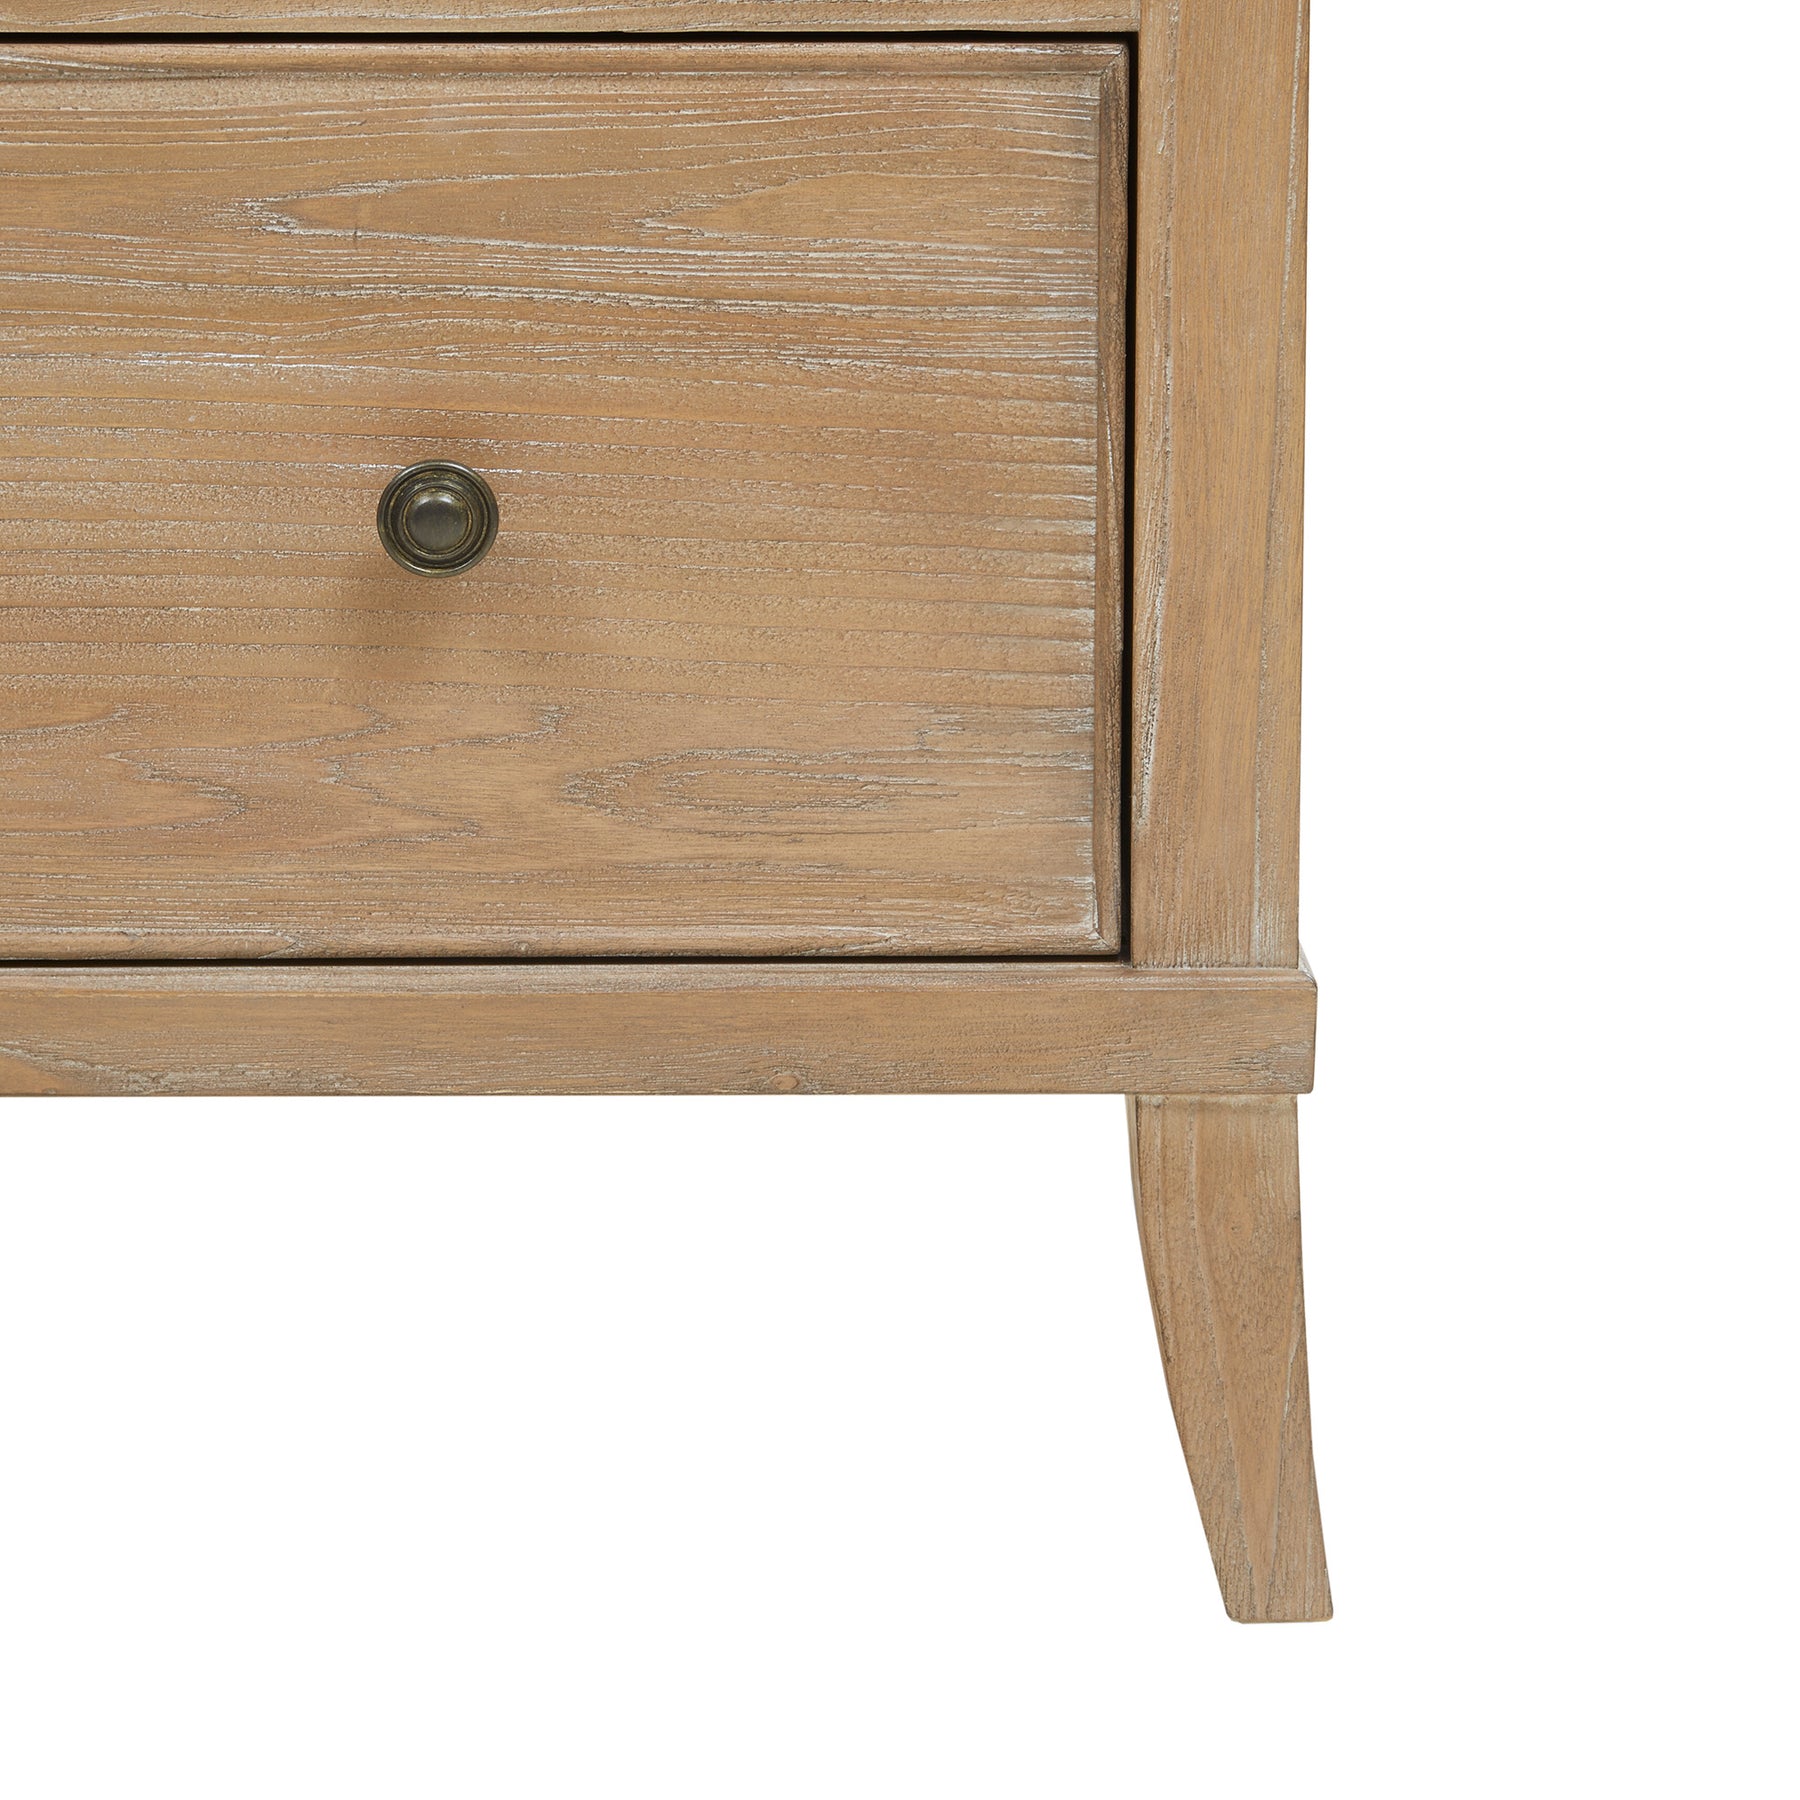 Cora Tallboy Unfolding Chest of Drawers - BUBULAND HOME